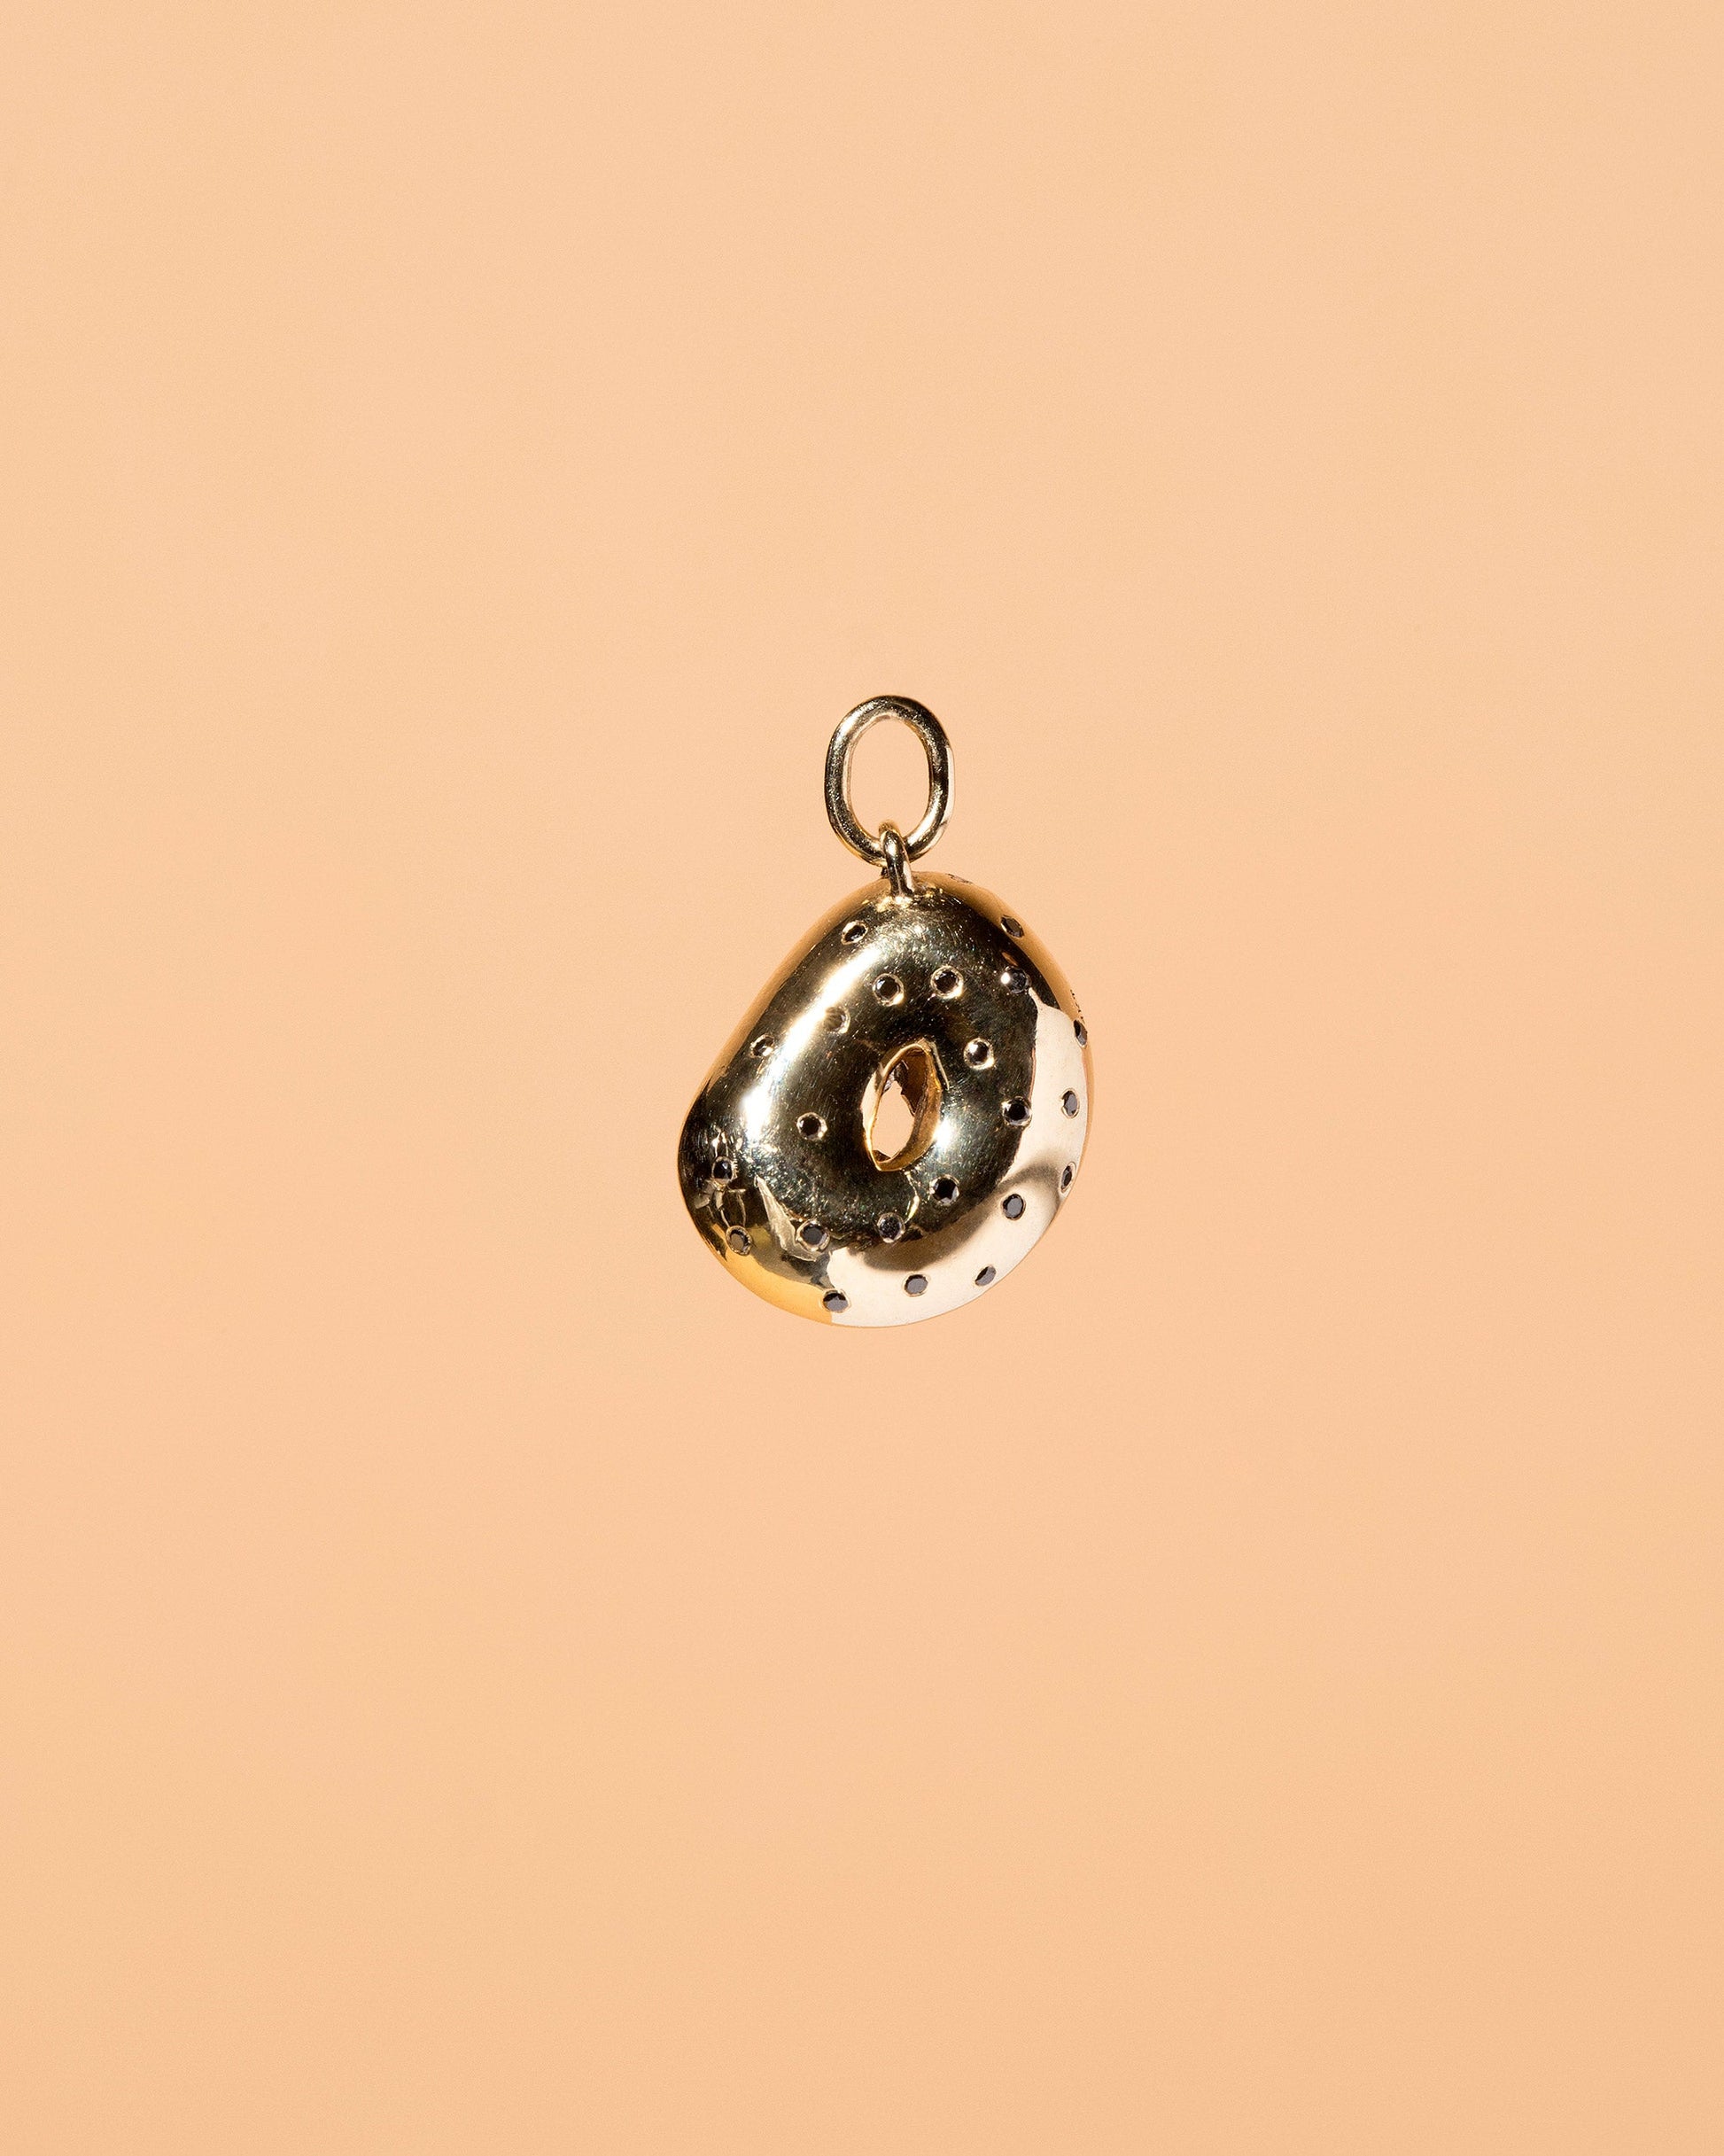  Poppy Seed Bagel Charm with Cream Cheese & Chives on light color background.